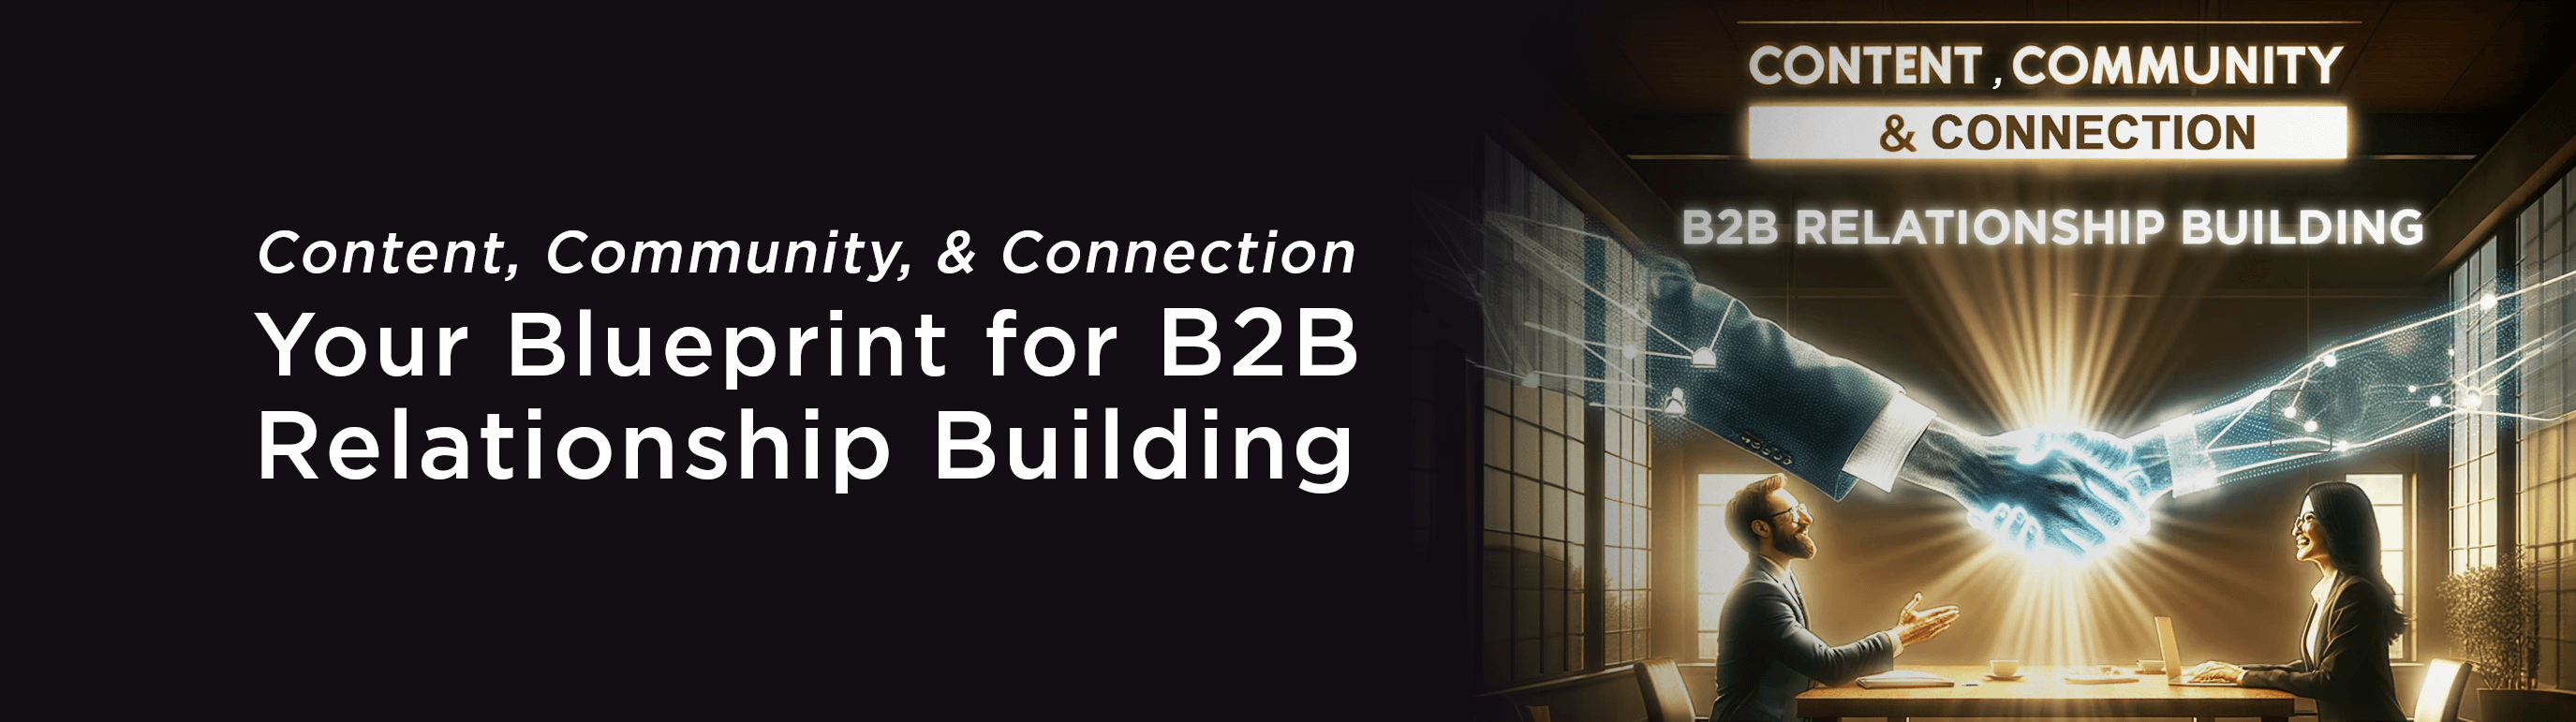 Your Blueprint for B2B Relationship Building